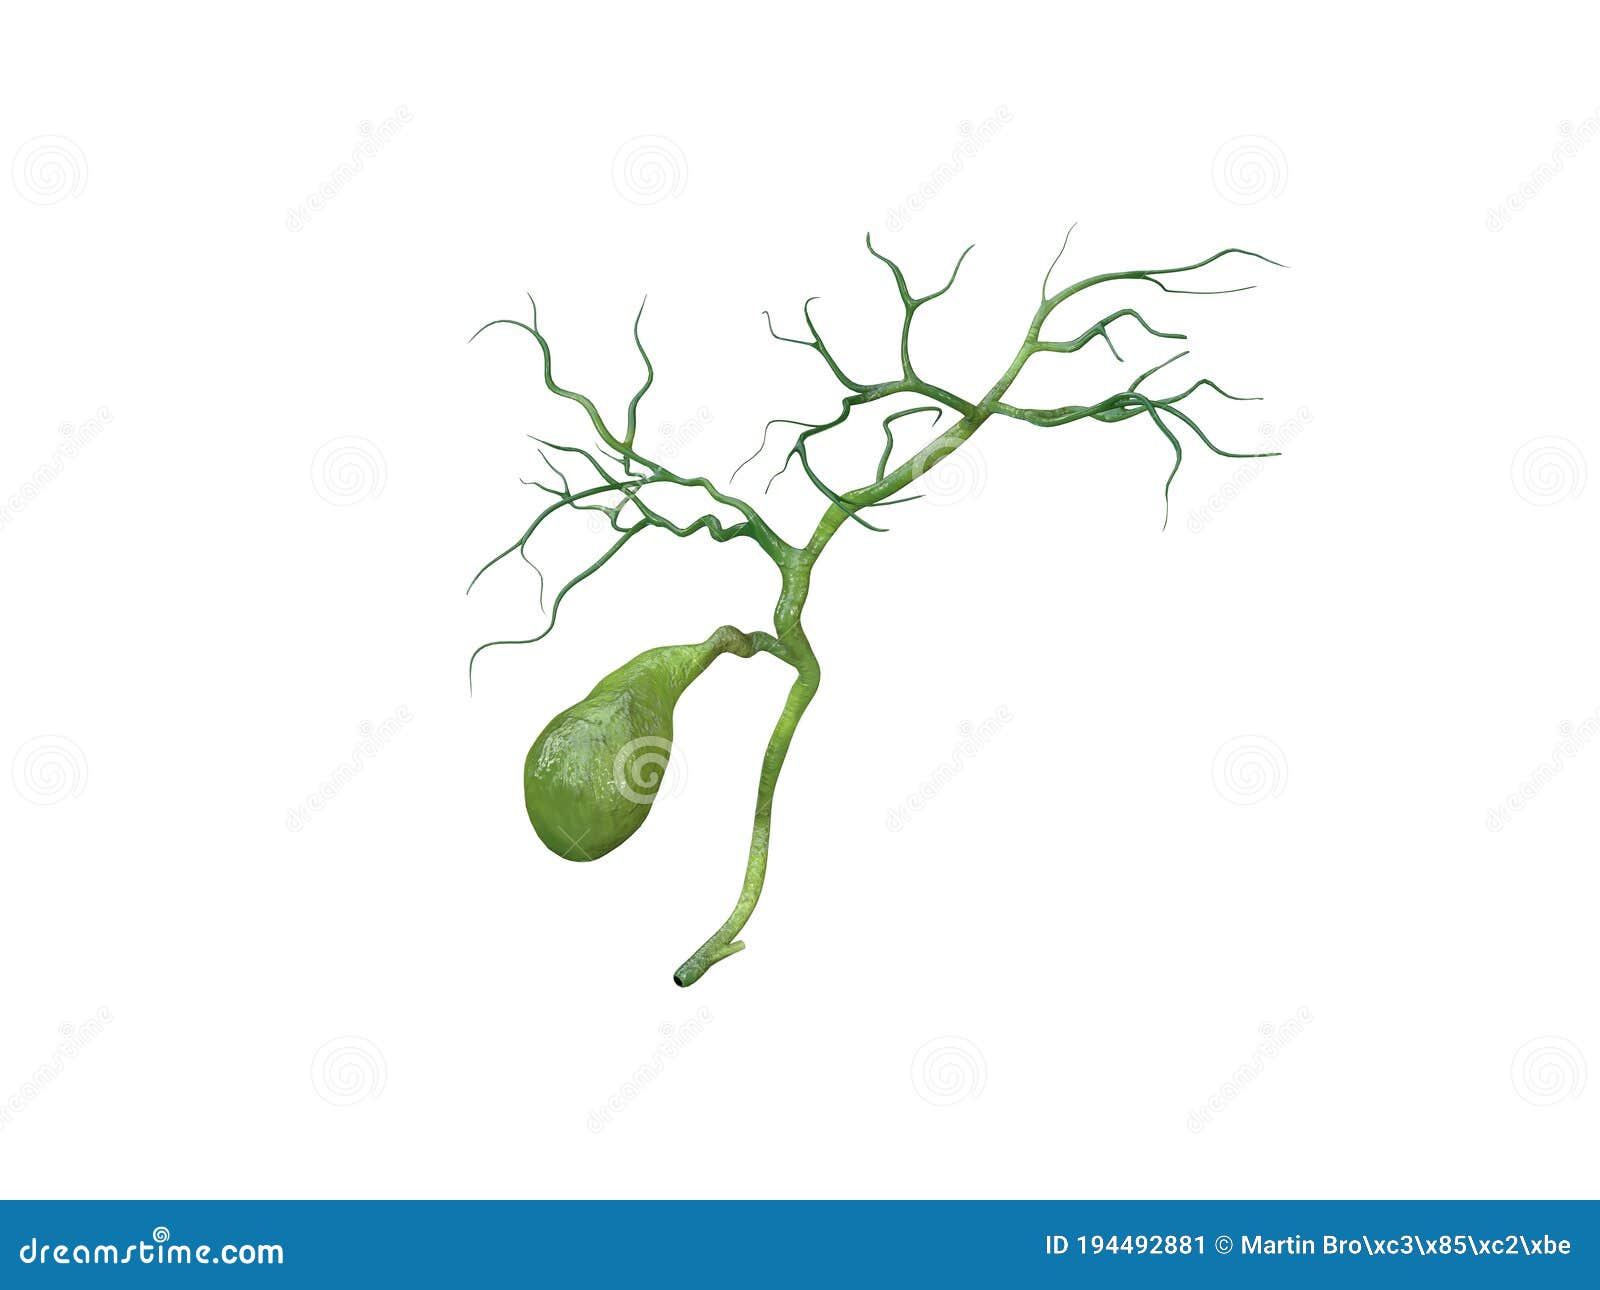 gallbladder anatomy  on white background, human gallbladder connection to the bile ducts, pain, 3d rendering